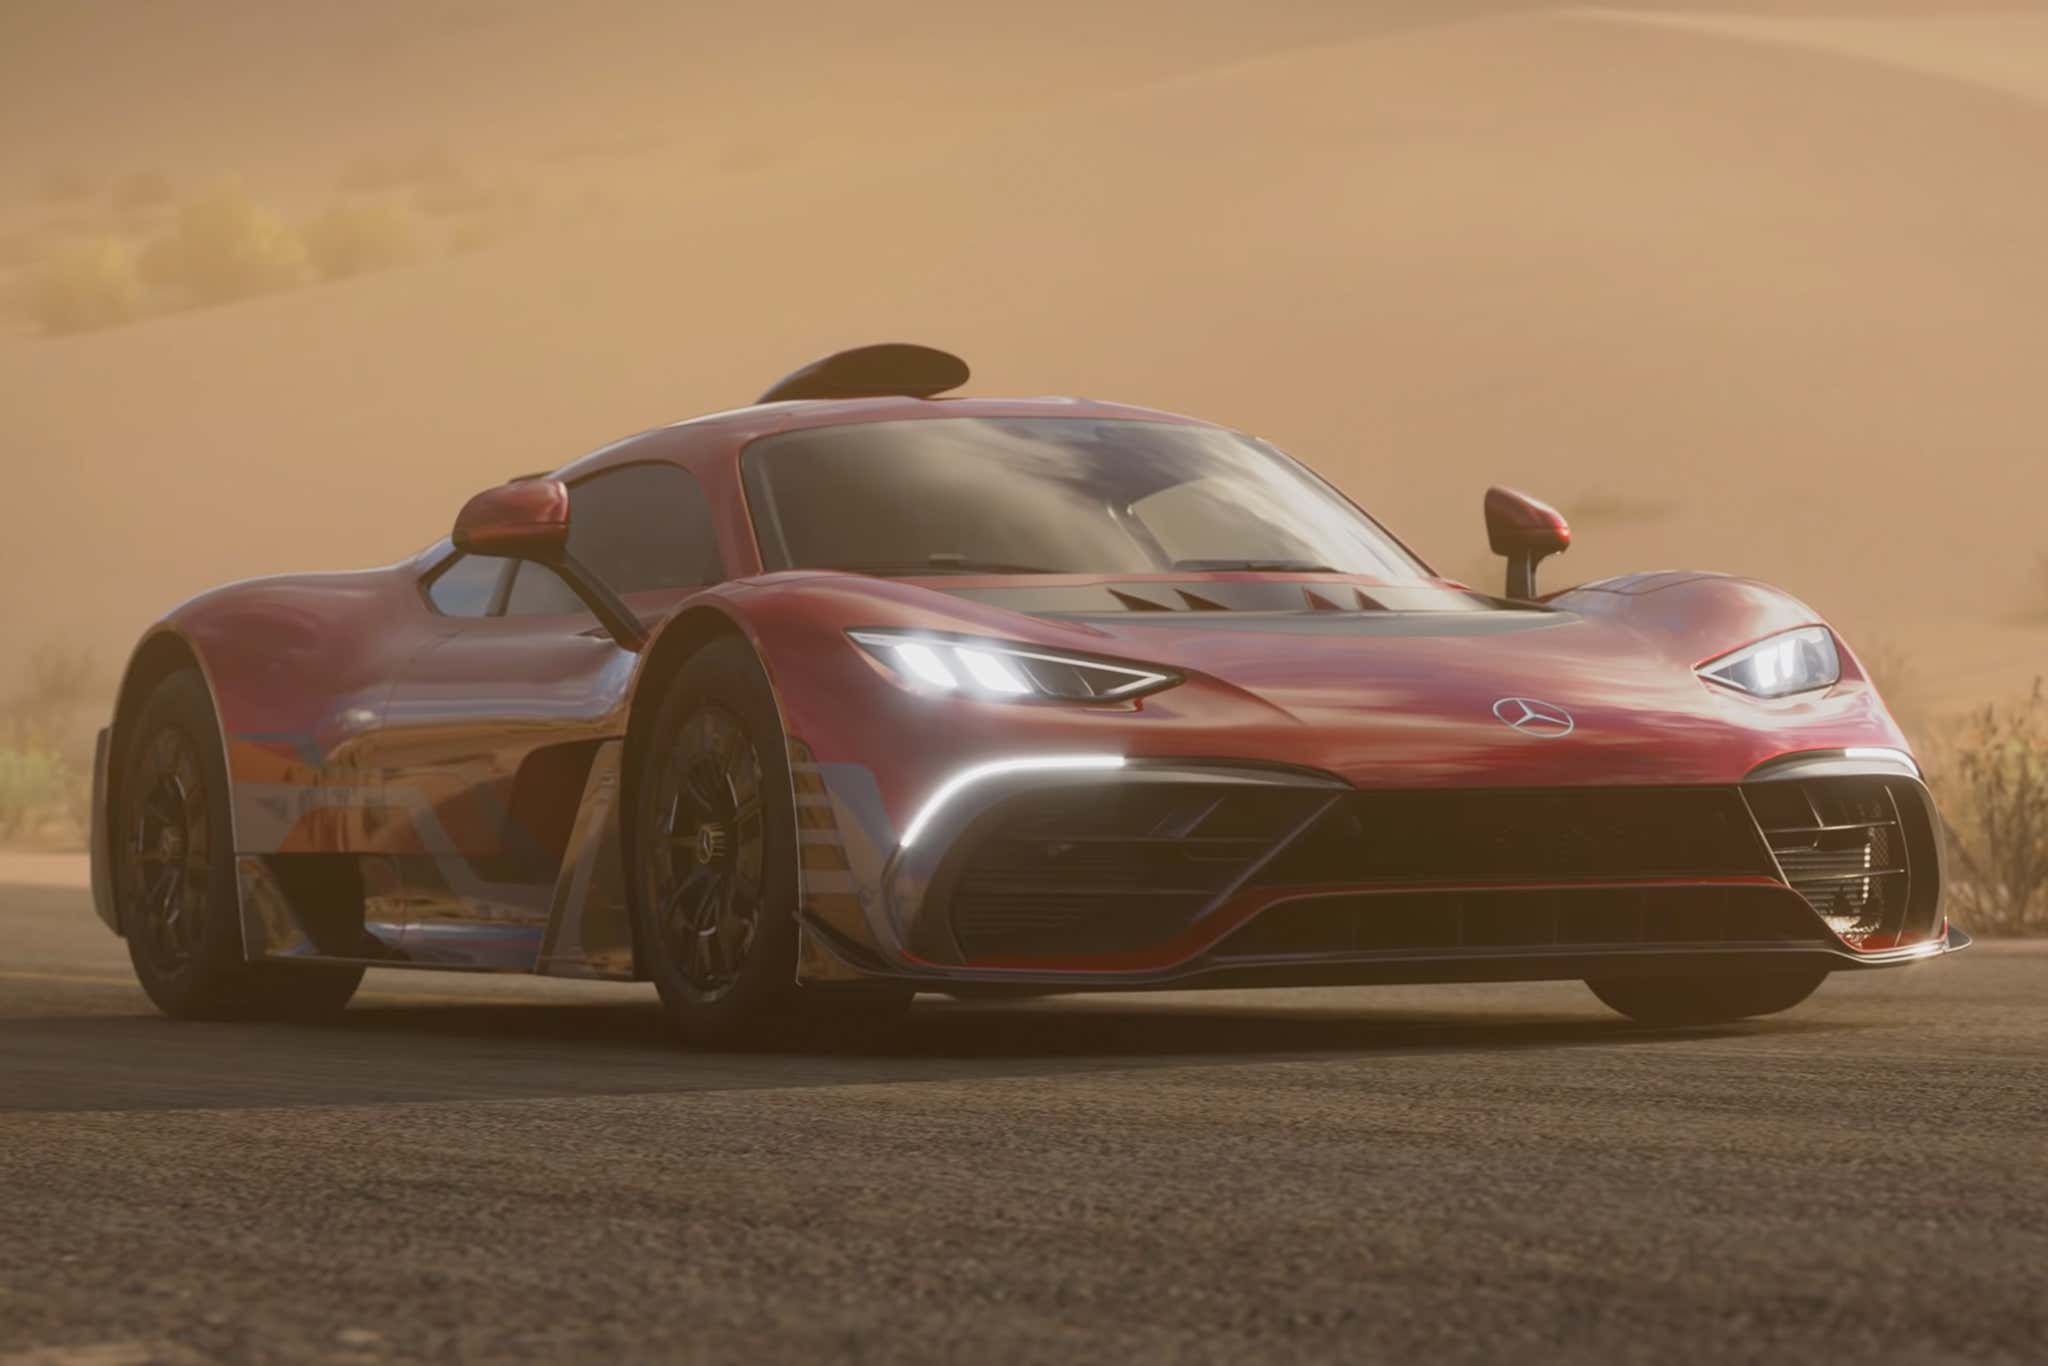 Screen grab of the Hero car for Forza Horizon 5, a Mercedes-AMG One. This new game represents one of the best car games of all time